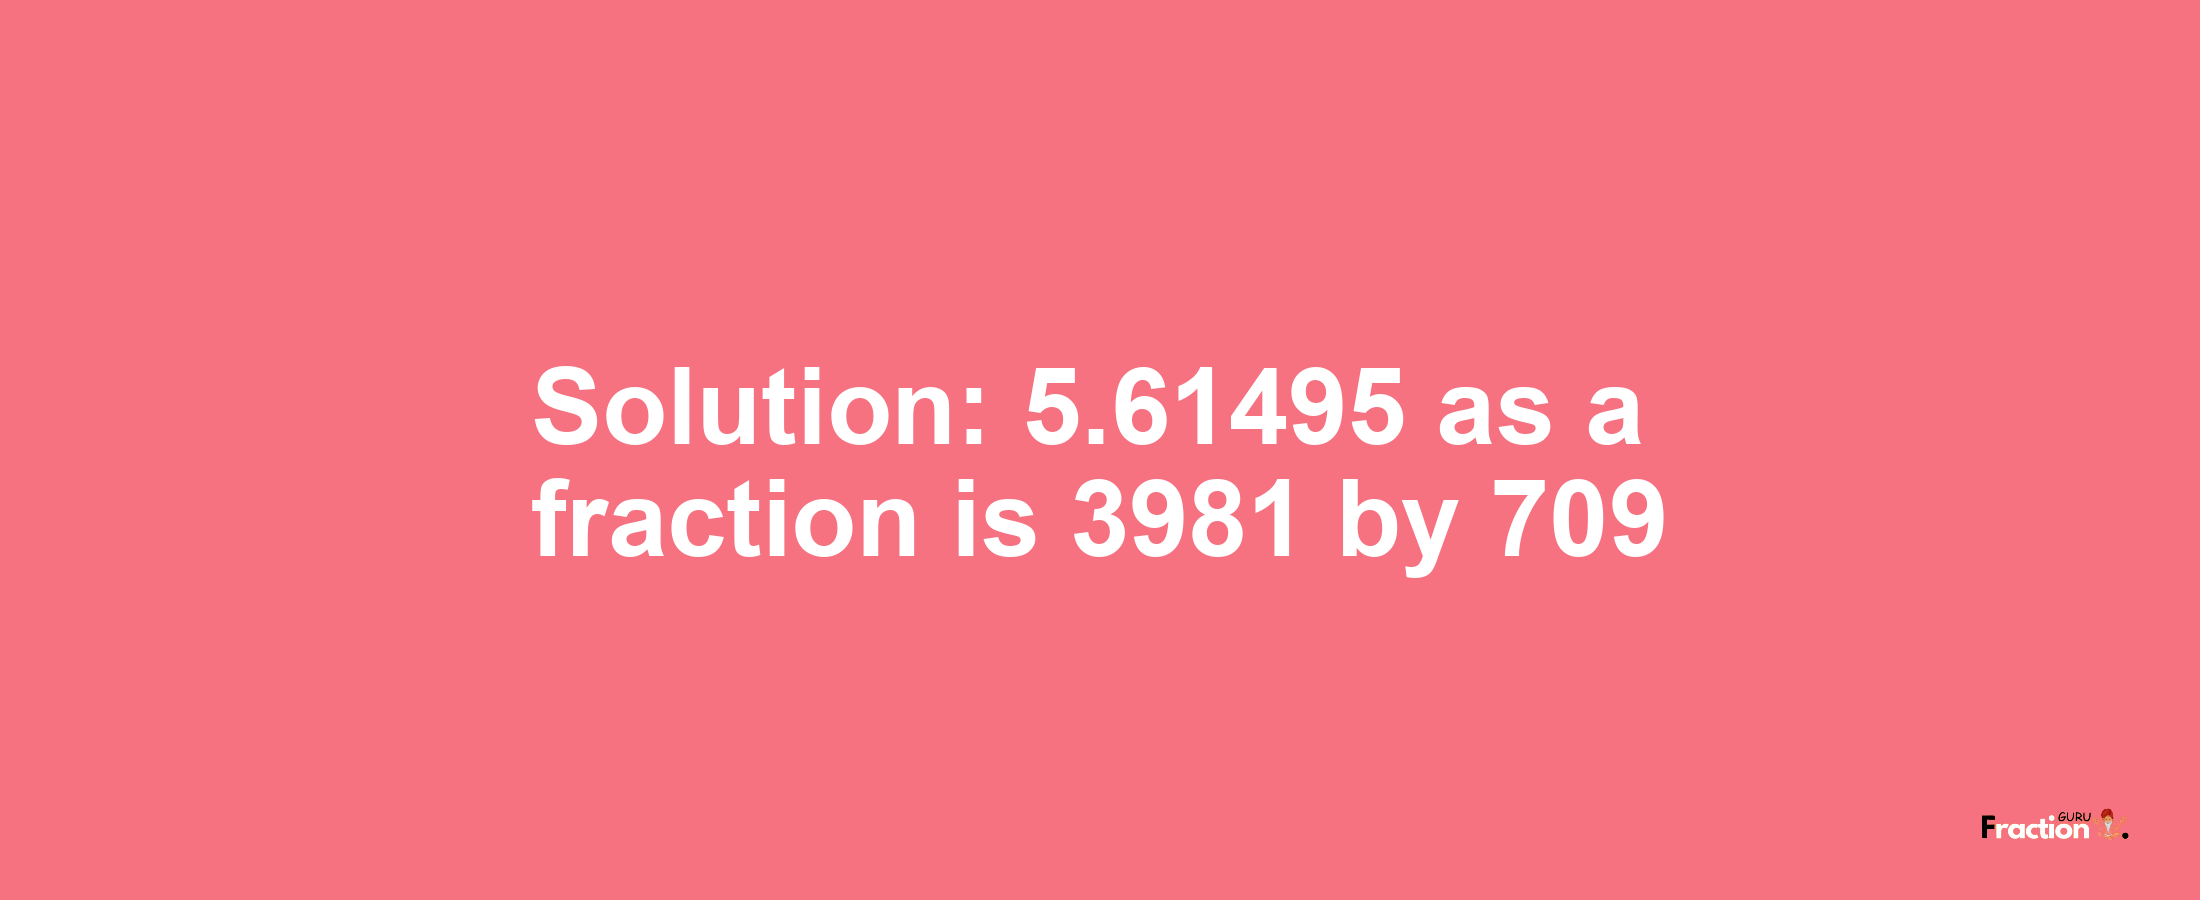 Solution:5.61495 as a fraction is 3981/709